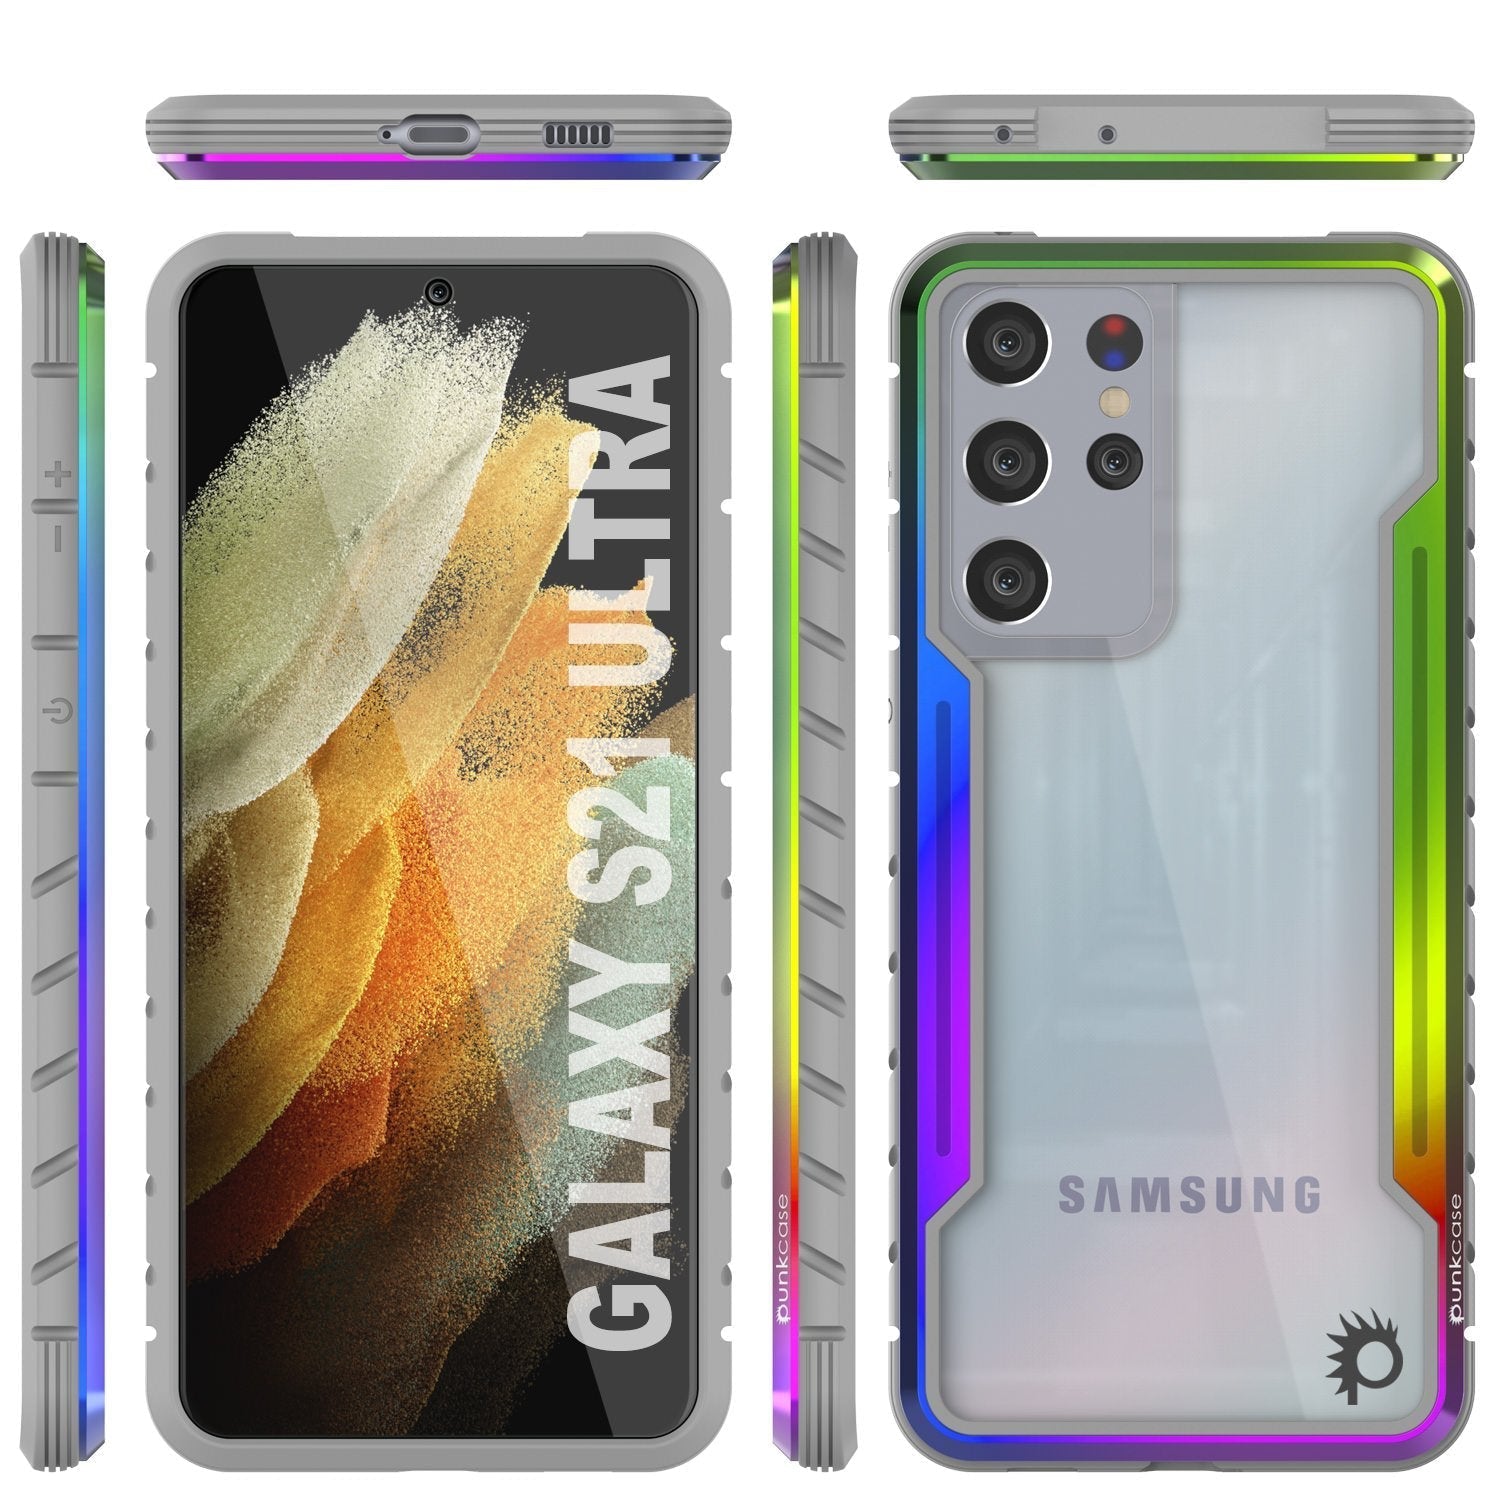 Punkcase S21 Ultra ravenger Case Protective Military Grade Multilayer Cover [Rainbow]